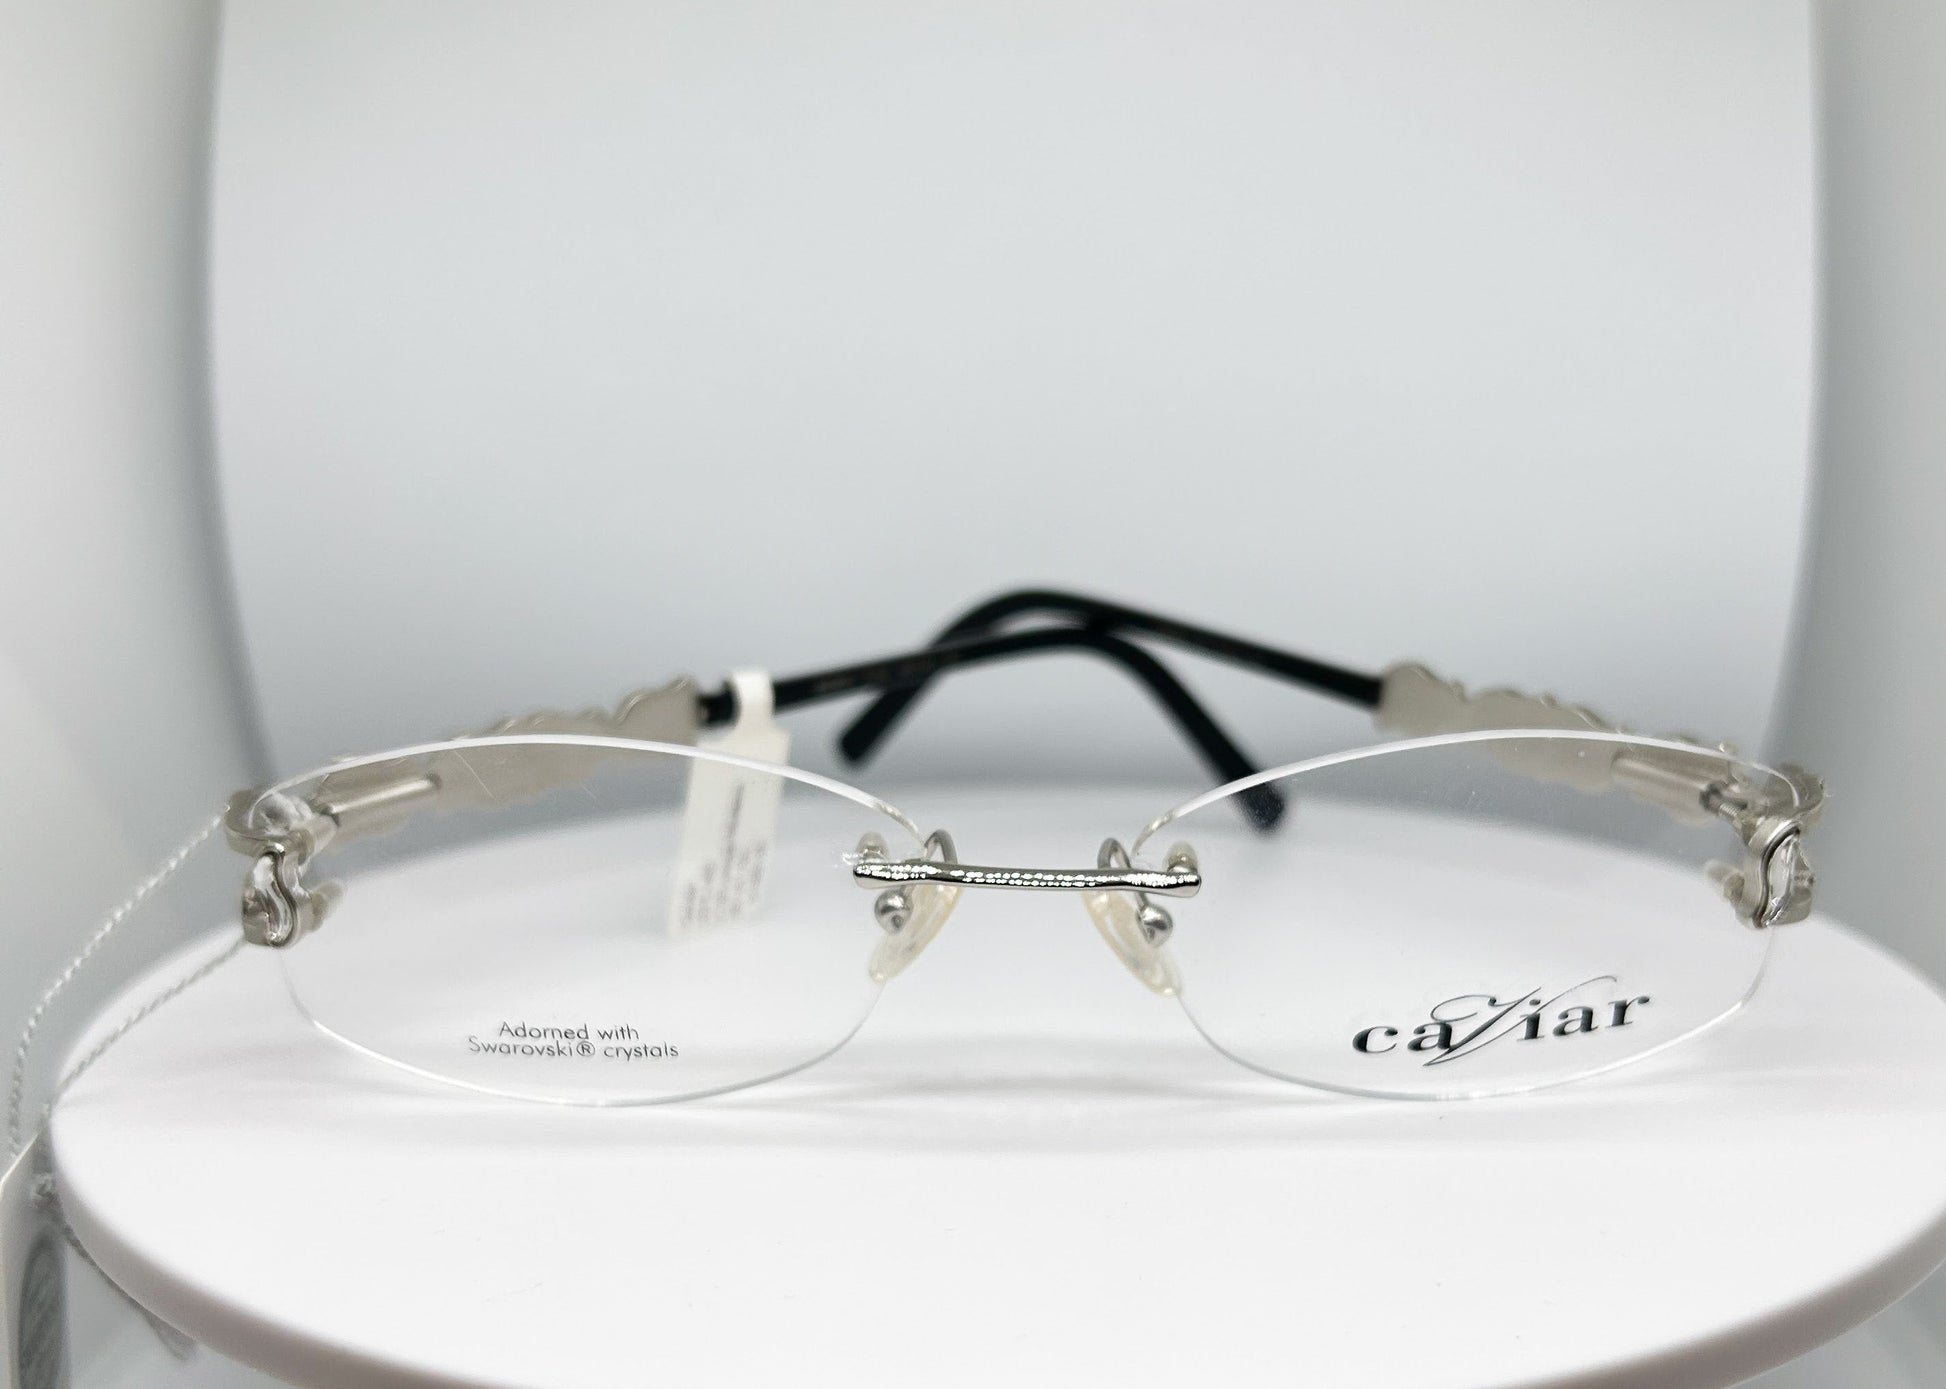 Buy Caviar 2373, a  Black, Silver; Metal rimless Optical Frame with a Square shape. Adair Eyewear - 40+ Years History